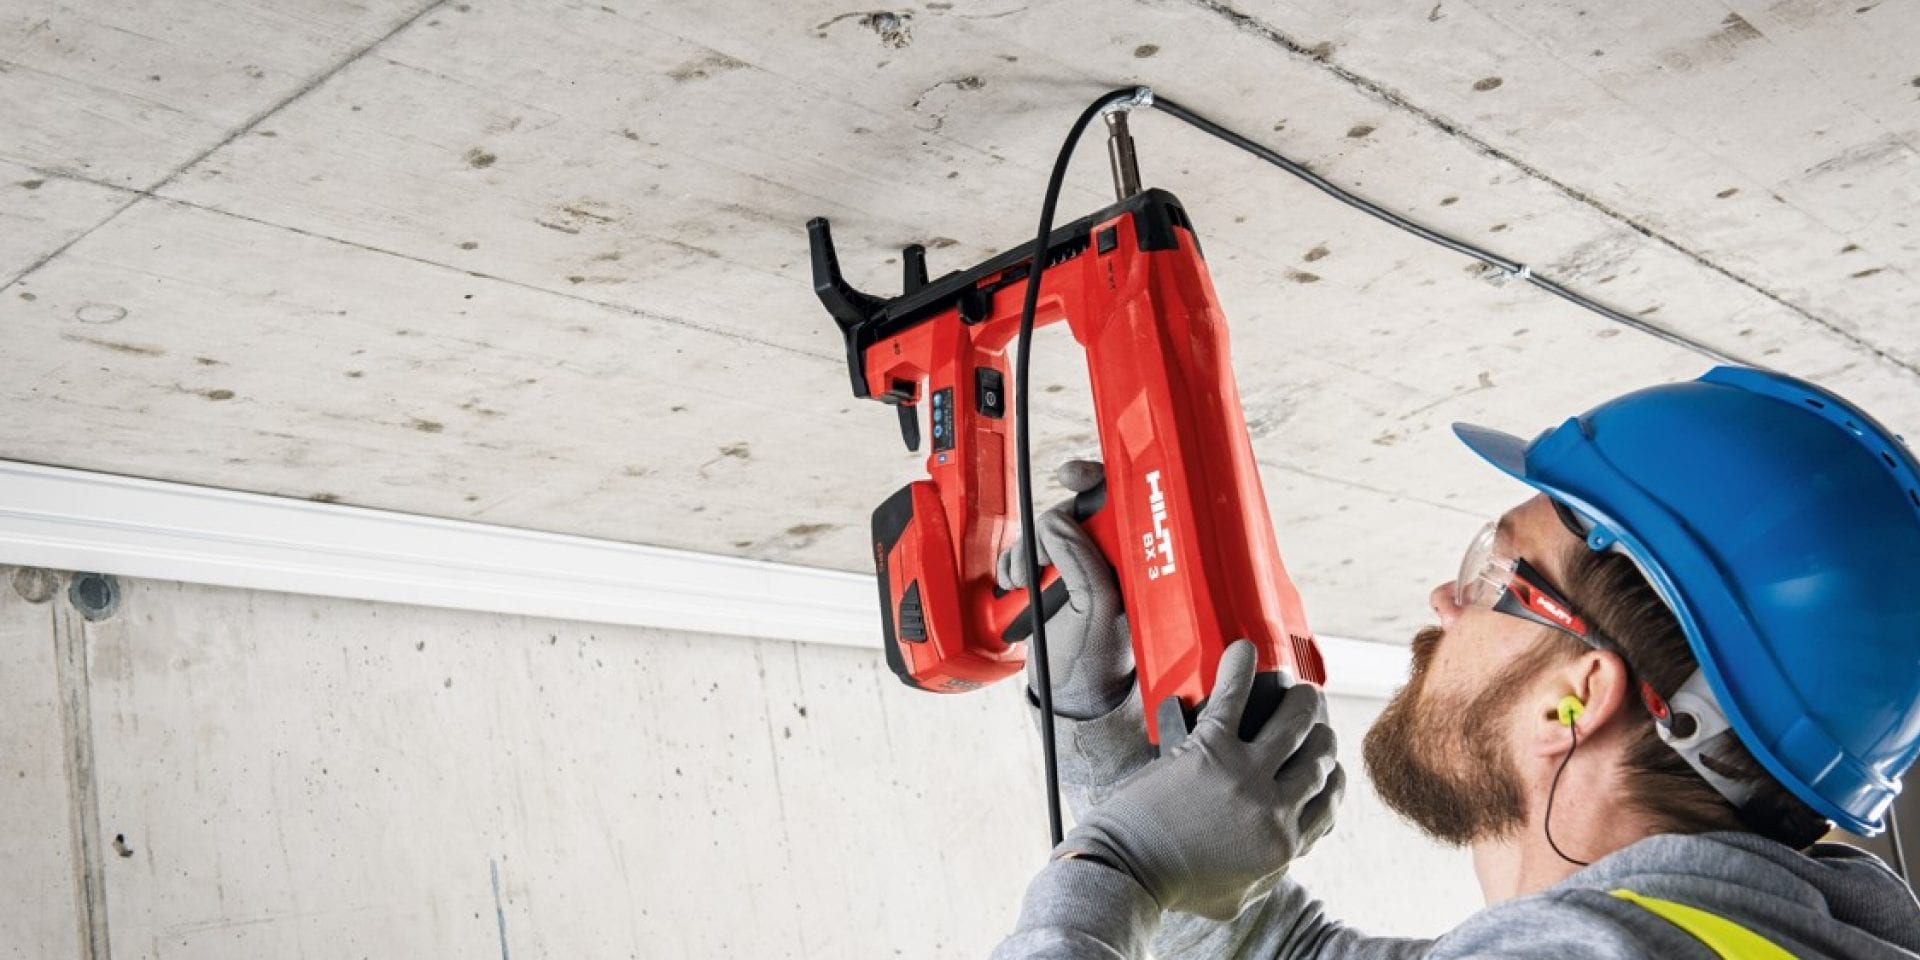 BX 3 is a battery-powered fastener tool, fastening to steel and concrete.